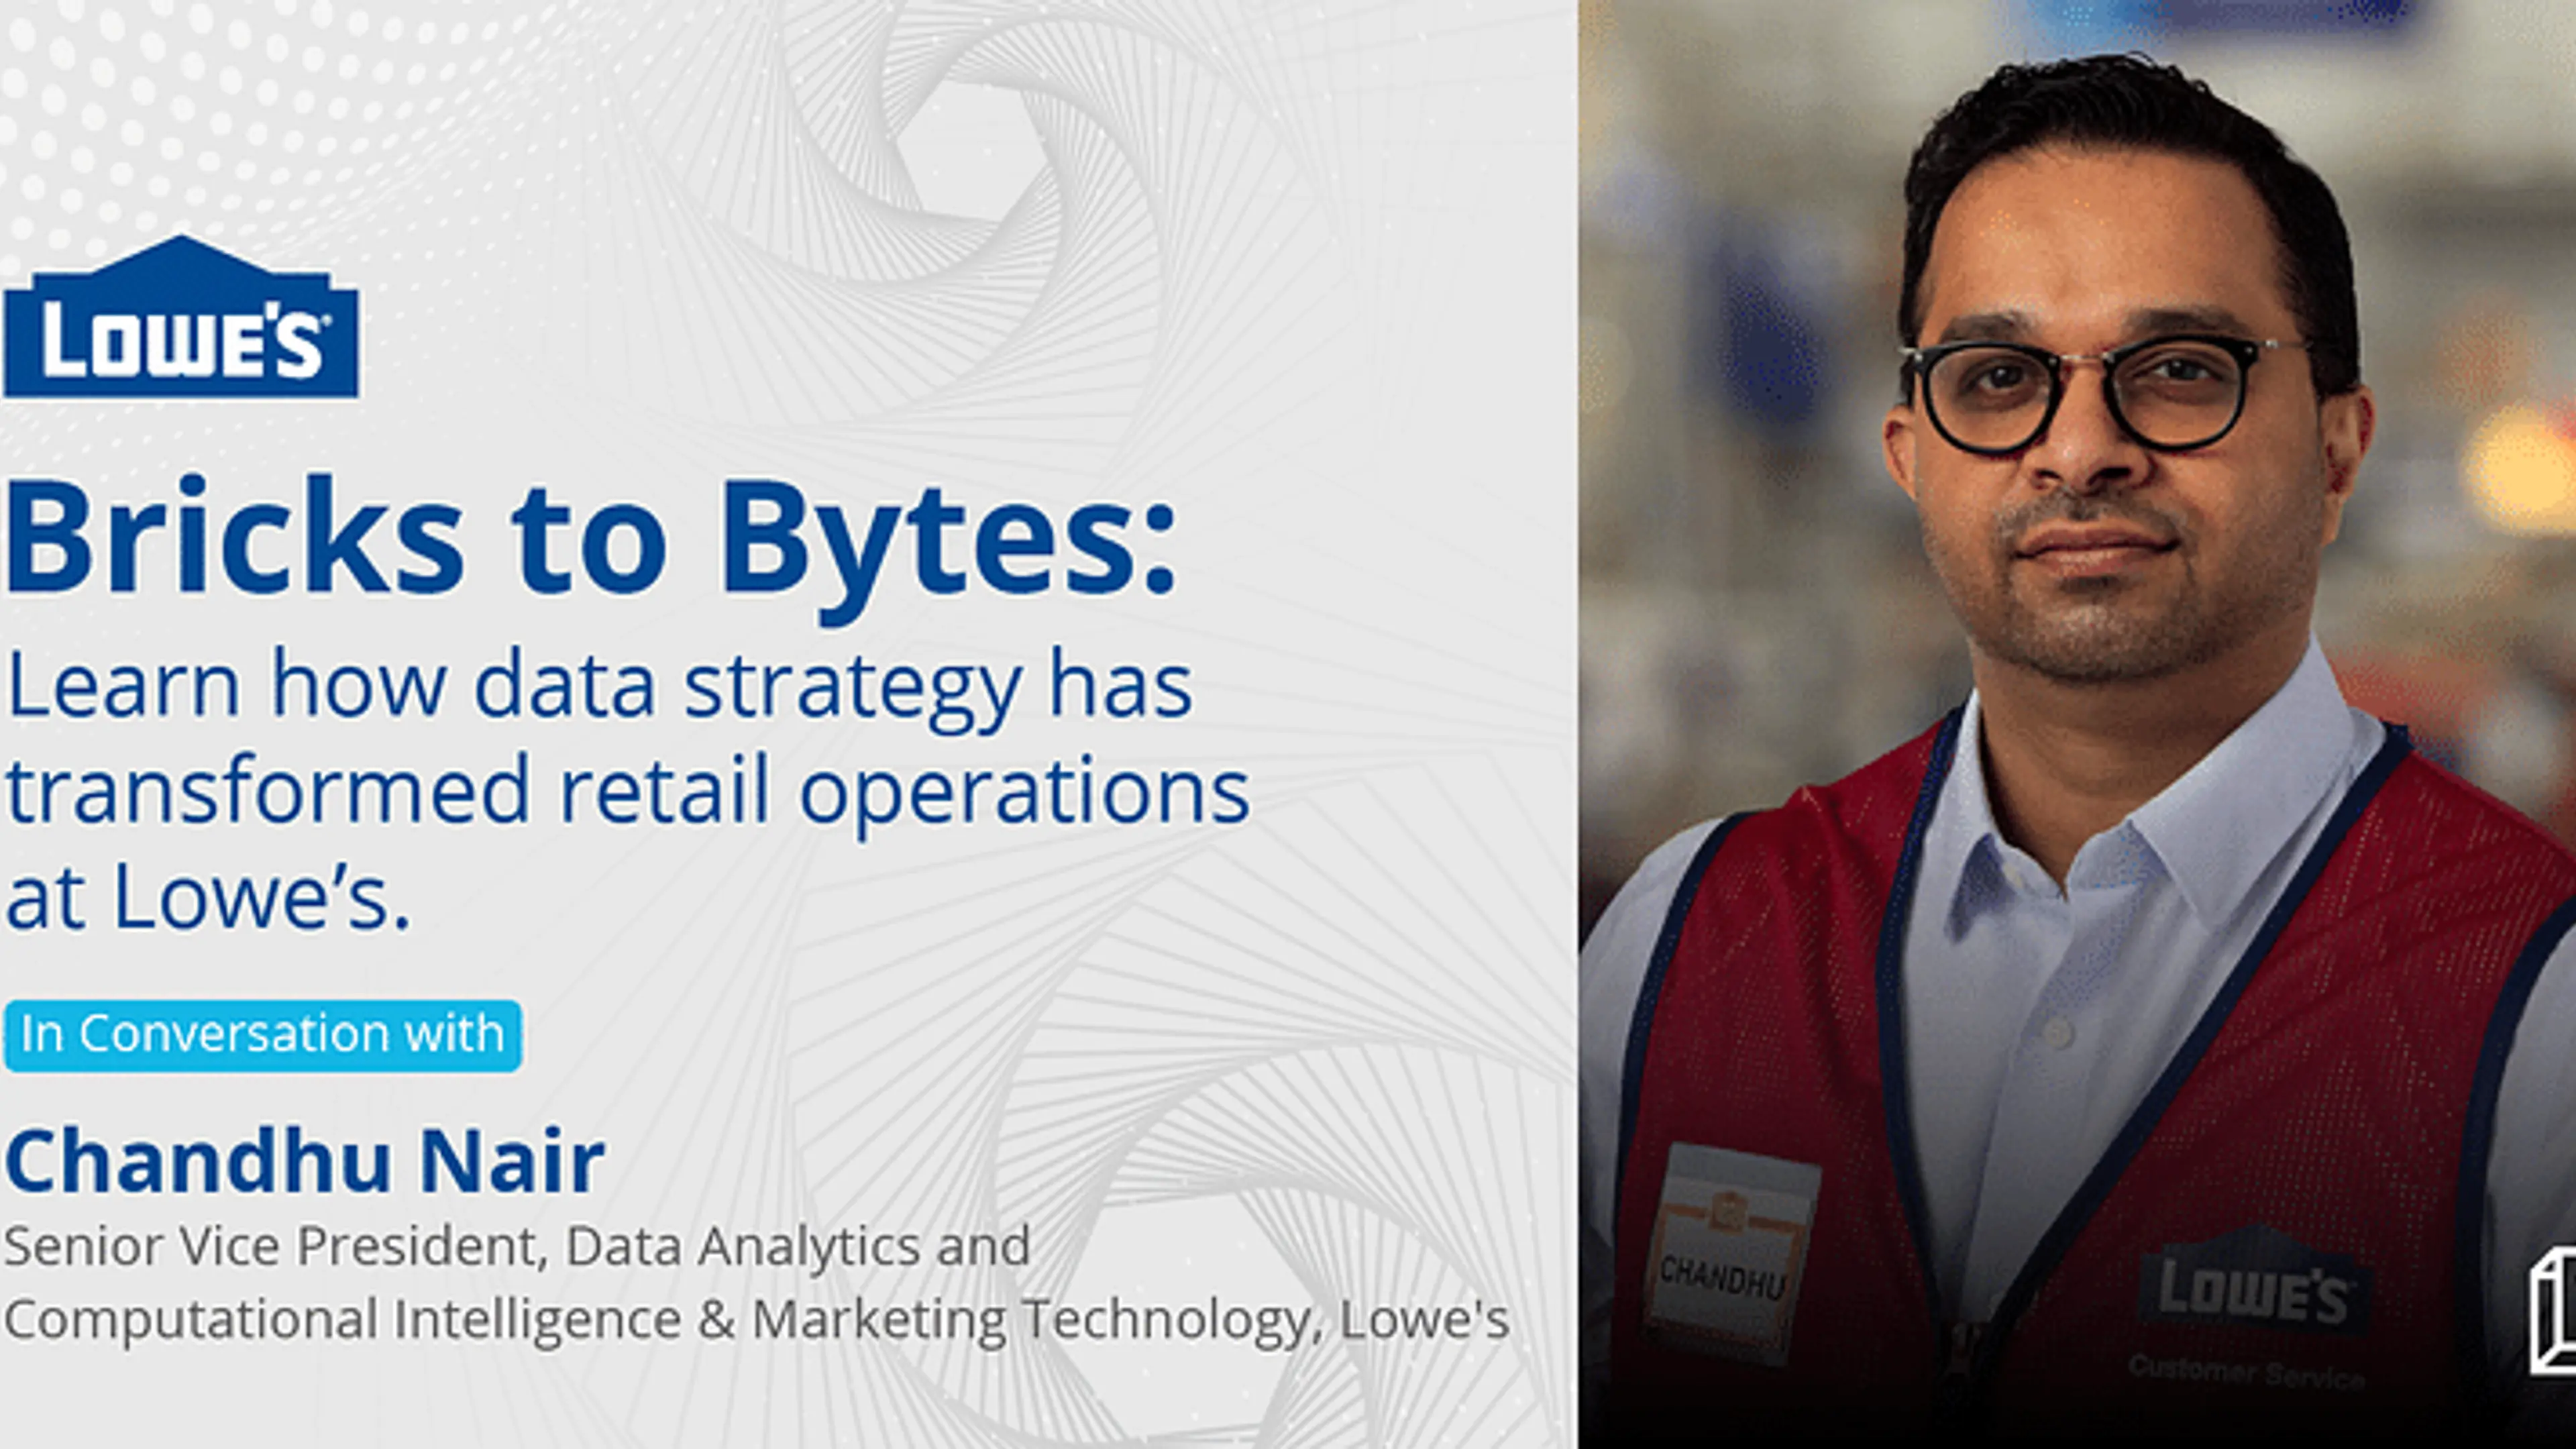 Bricks to Bytes: Lowe’s Chandhu Nair reveals how data strategy has transformed retail operations